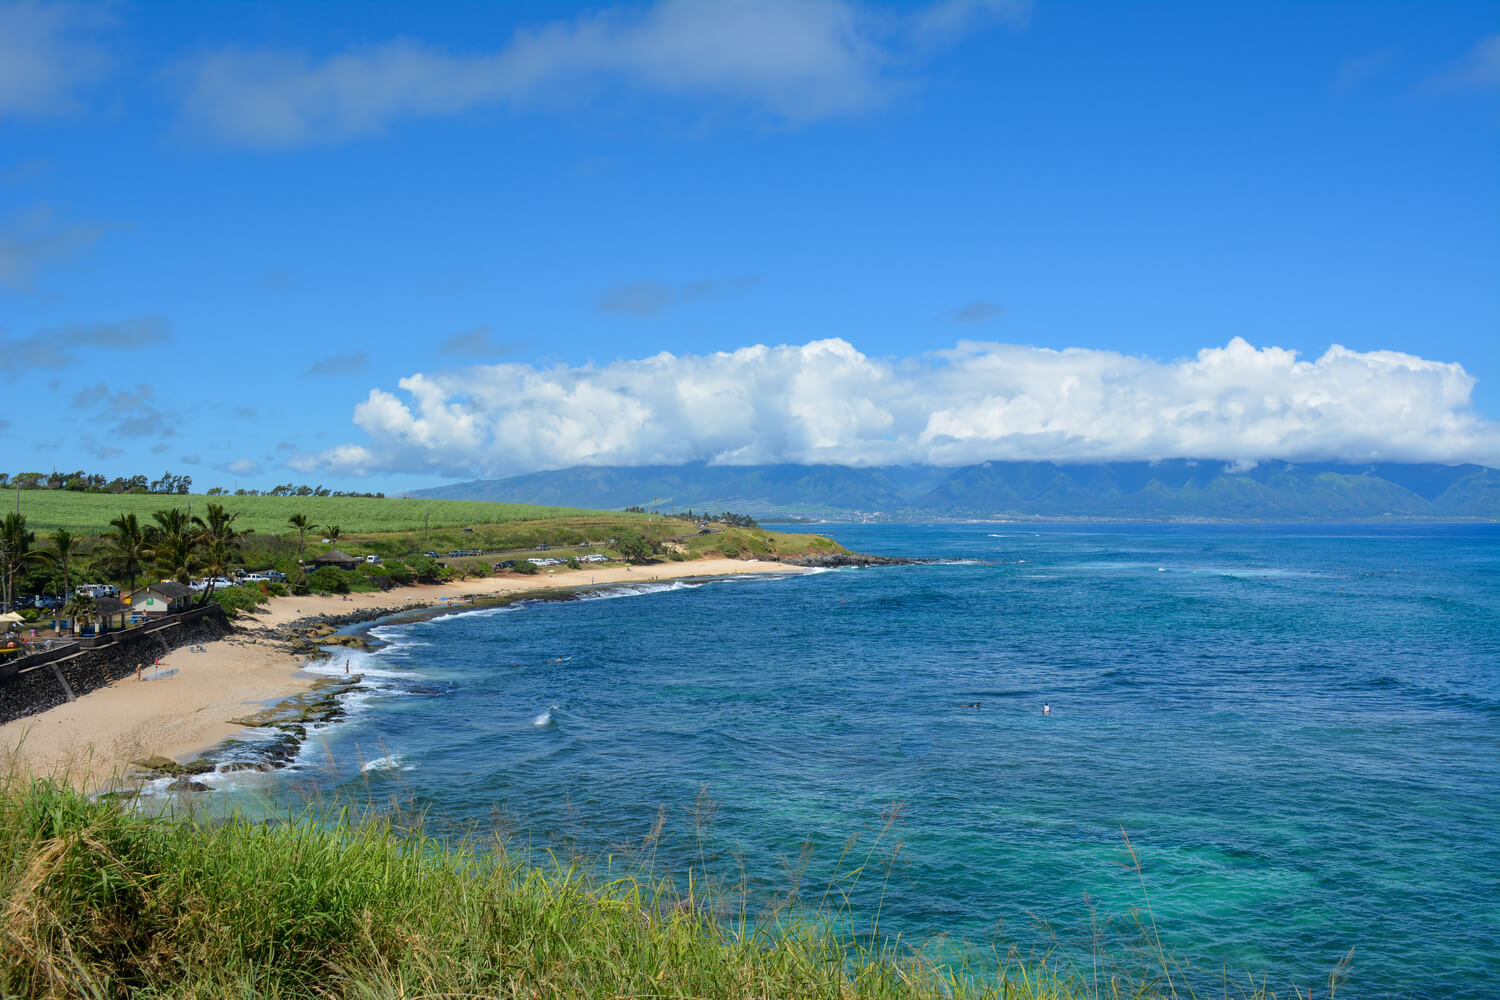 A stunning view of the Ho'okipa Beach Park in Maui.